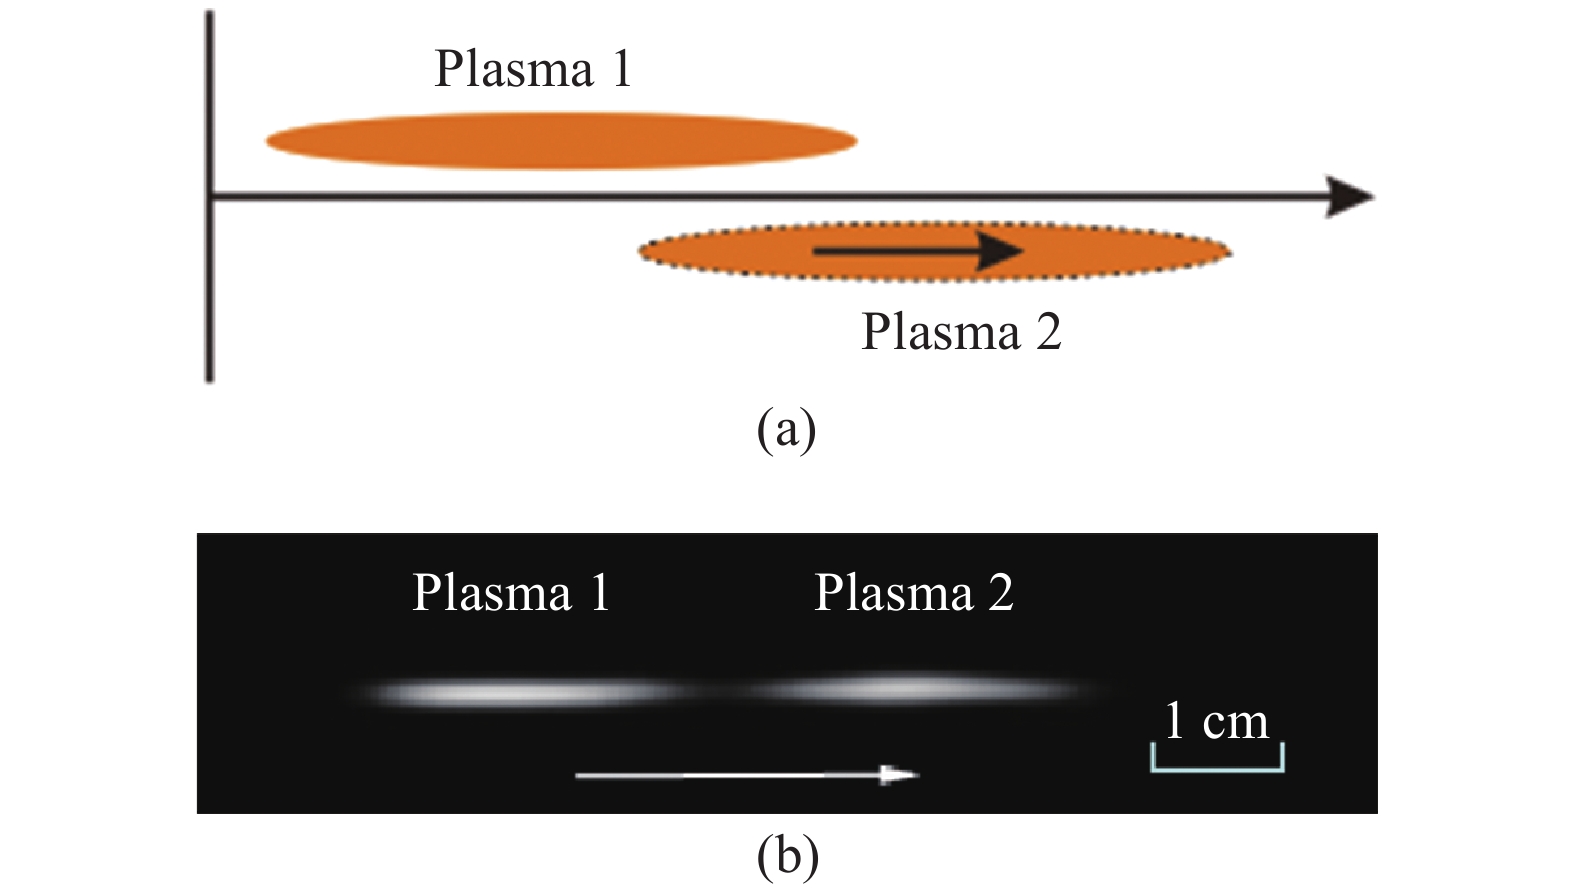 (a) Schematic diagram of the relative position of the two plasma filaments; (b) Two plasma filaments during the experiment (graphics obtained by CCD camera)